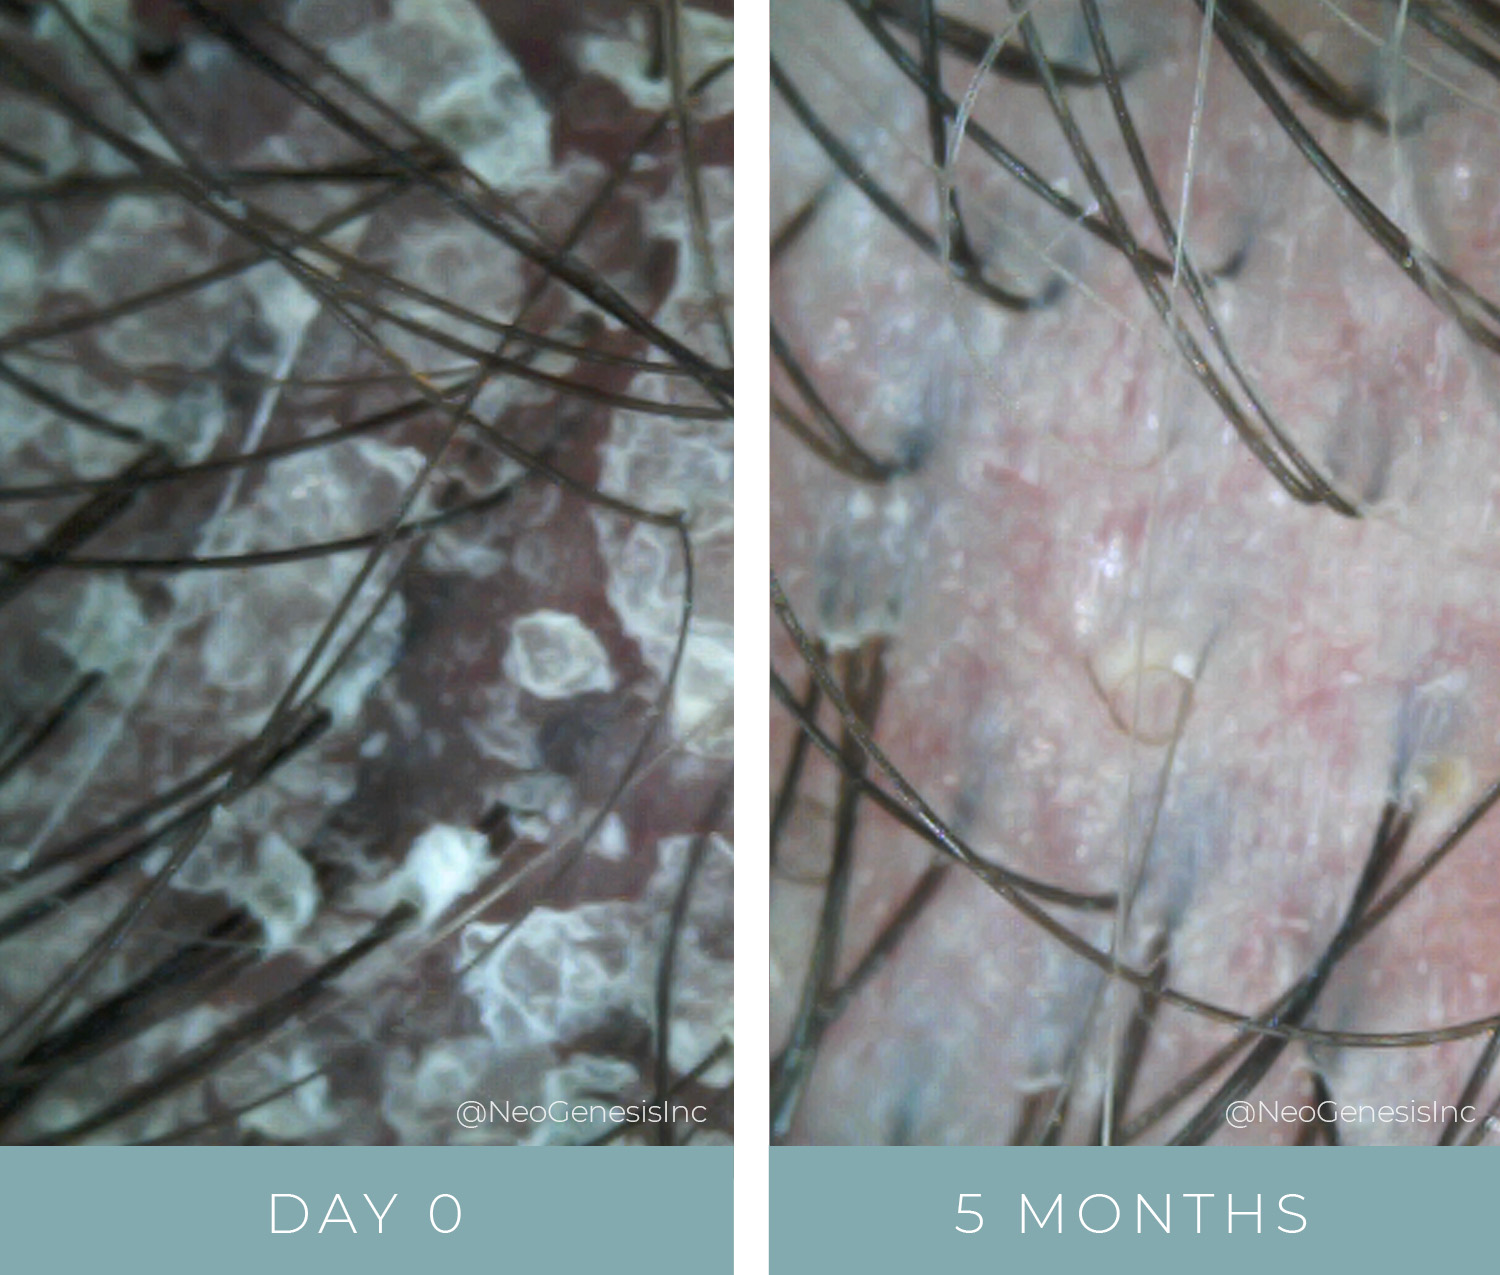 Before + After - Psoriasis on the scalp